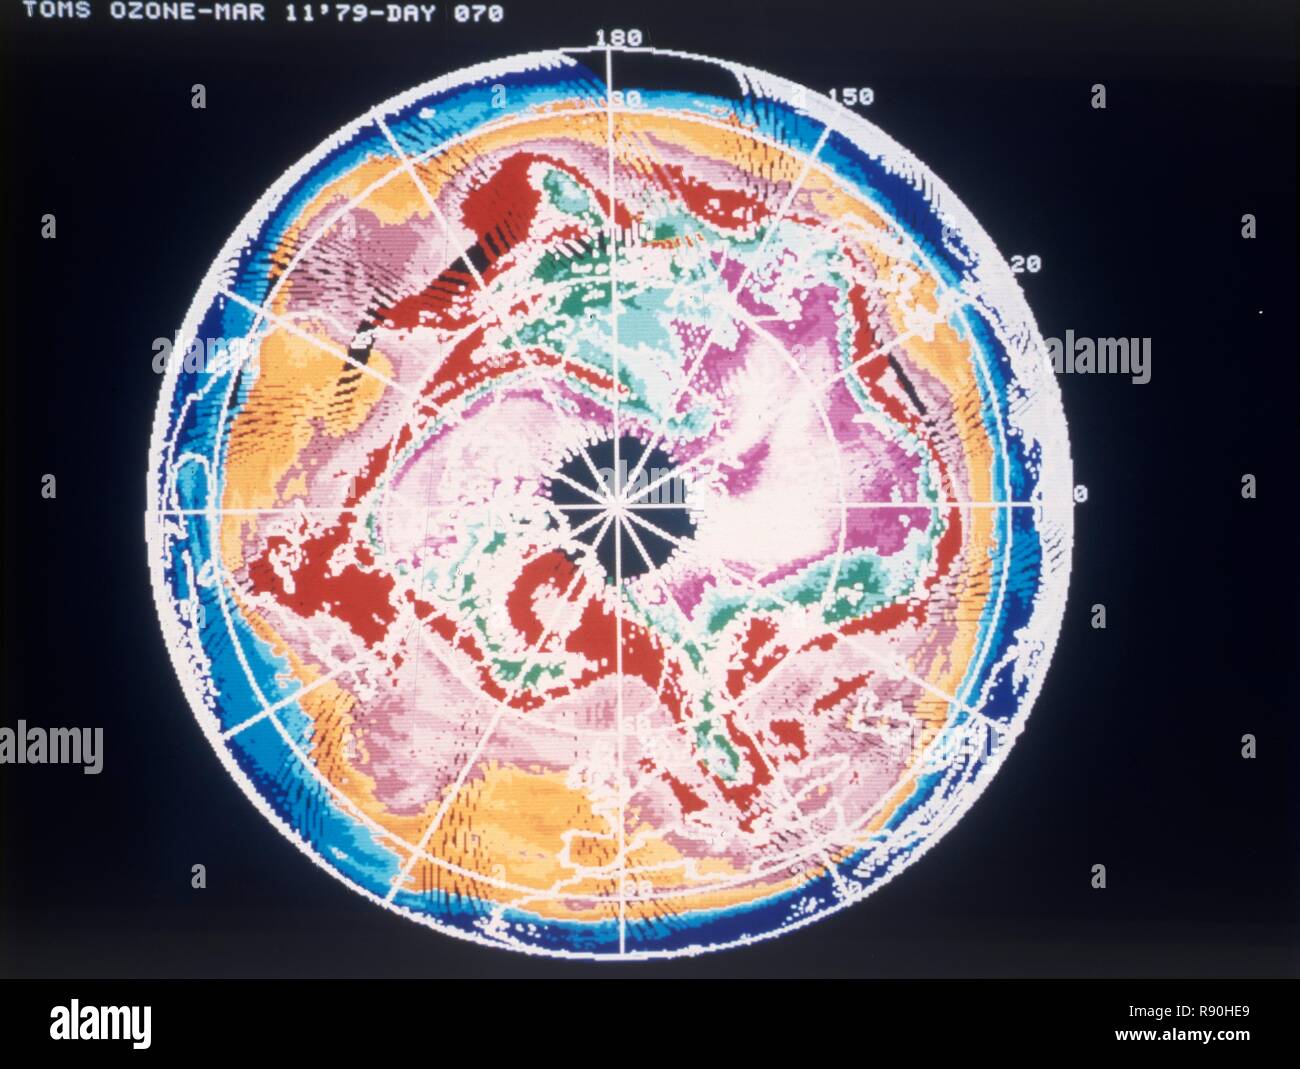 North Pole total ozone maps with meteorological chart, March 1979. Creator: NASA. Stock Photo